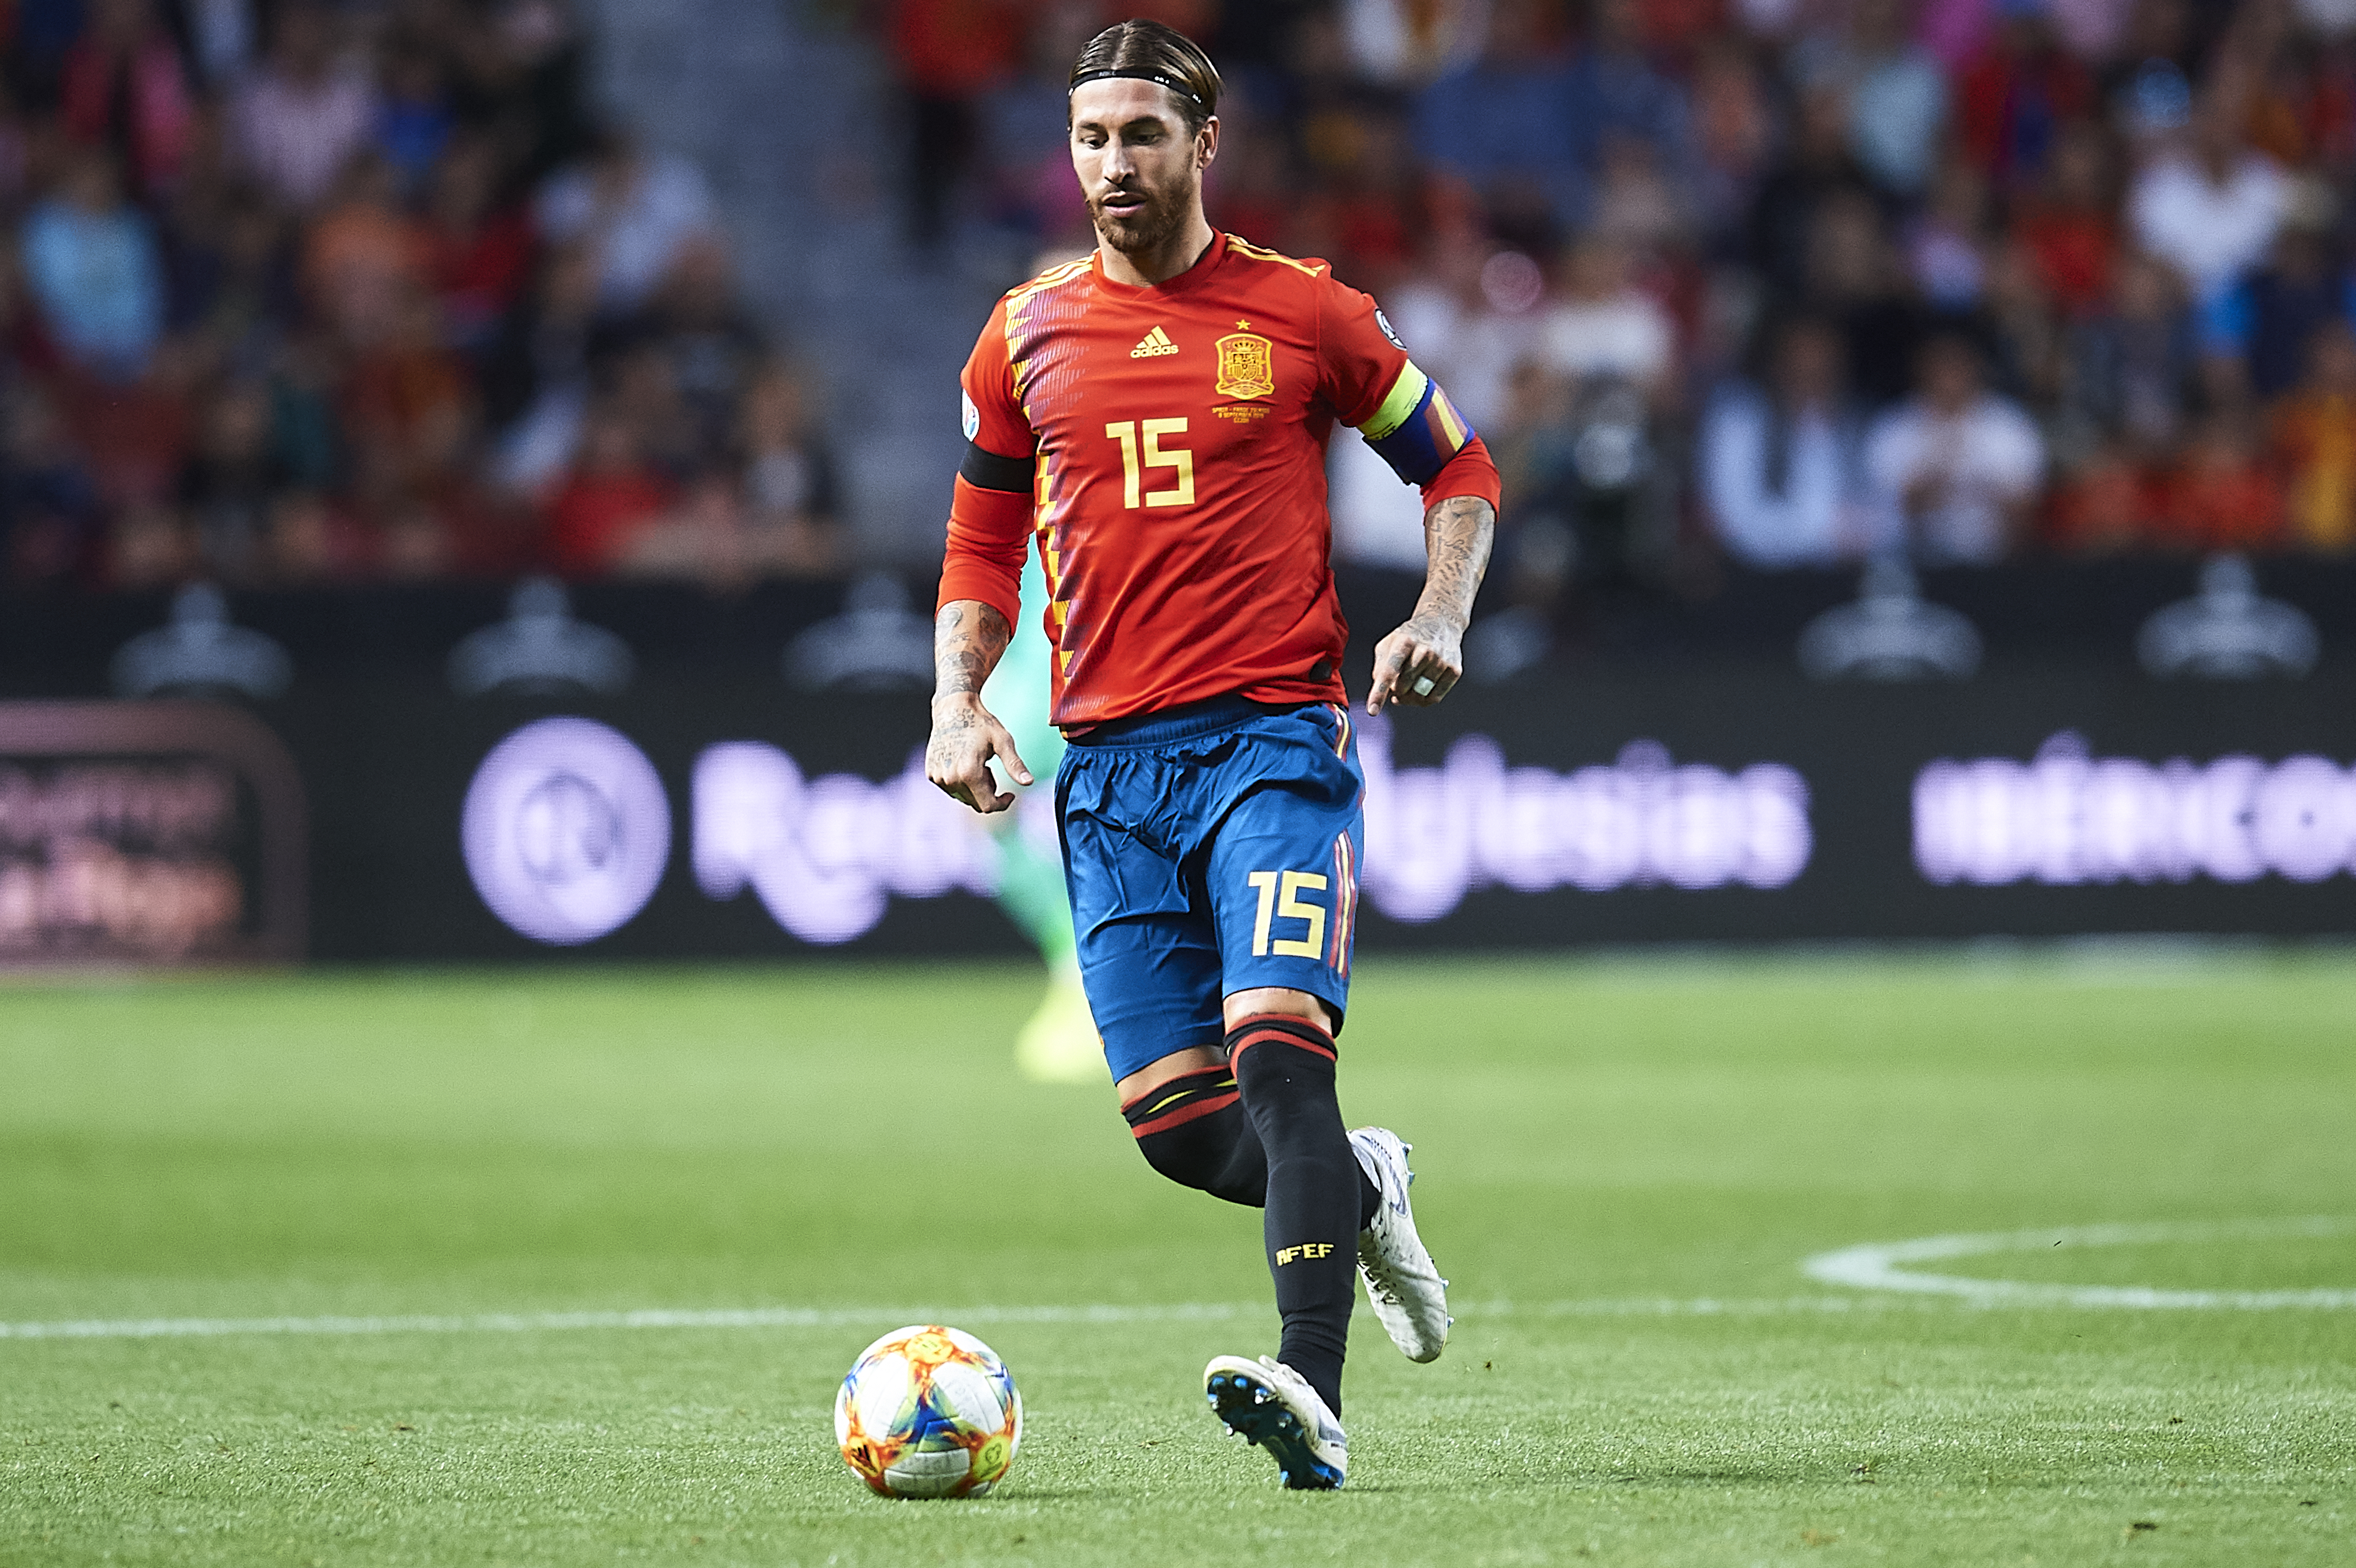 Could Ramos don the red of Manchester United? (Photo by Juan Manuel Serrano Arce/Getty Images)